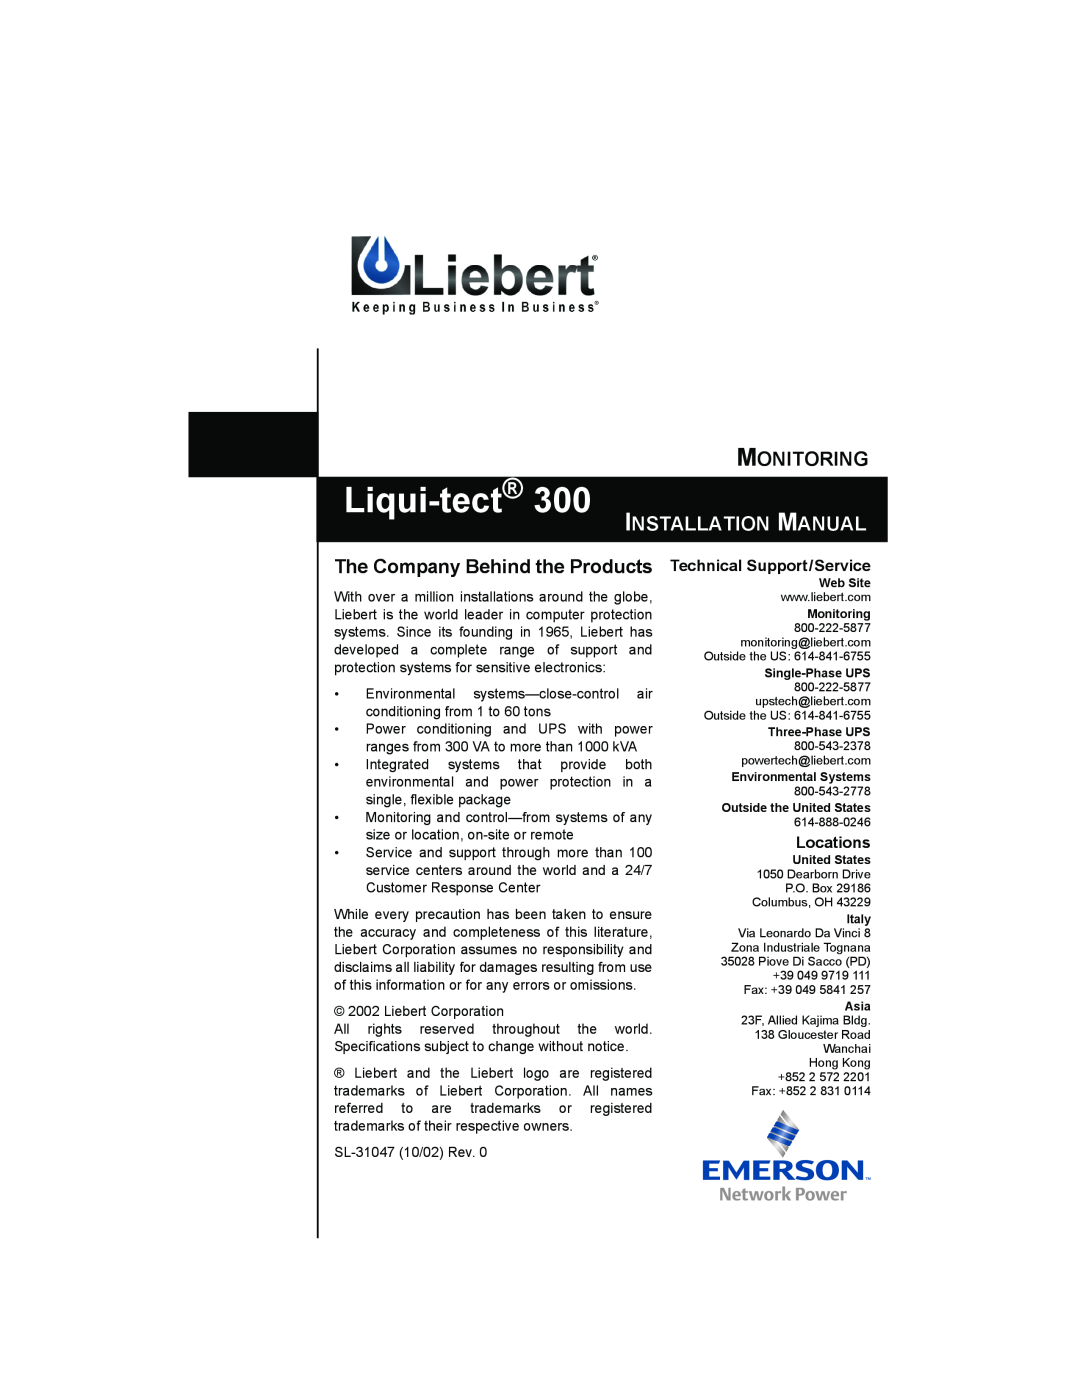 Liebert 300 Liqui-tect, Monitoring, Installation Manual, The Company Behind the Products, Technical Support/Service 